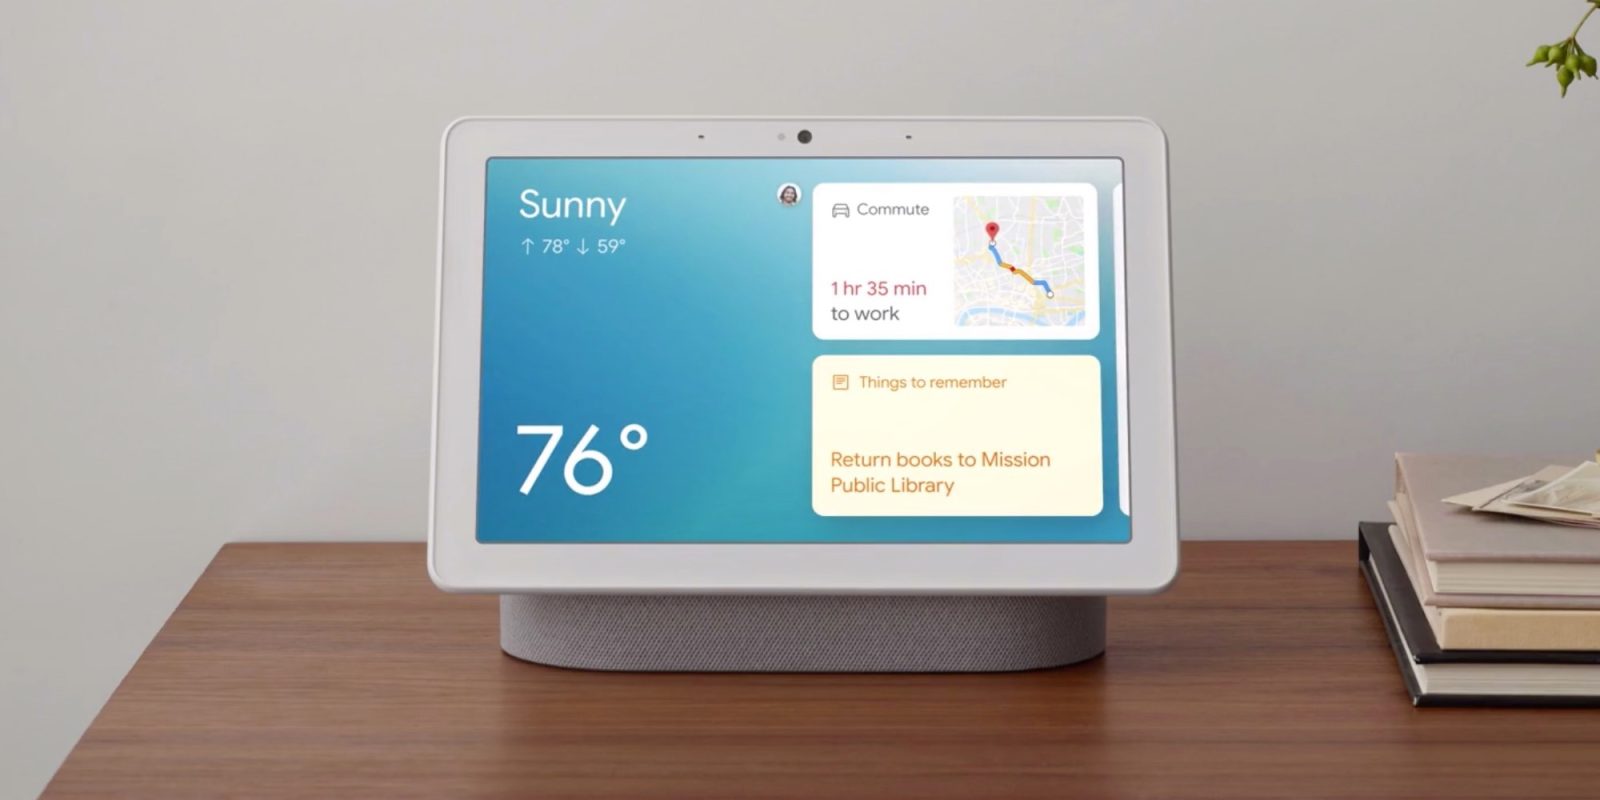 [Update Date pulled] Google Nest Hub Max will be available starting